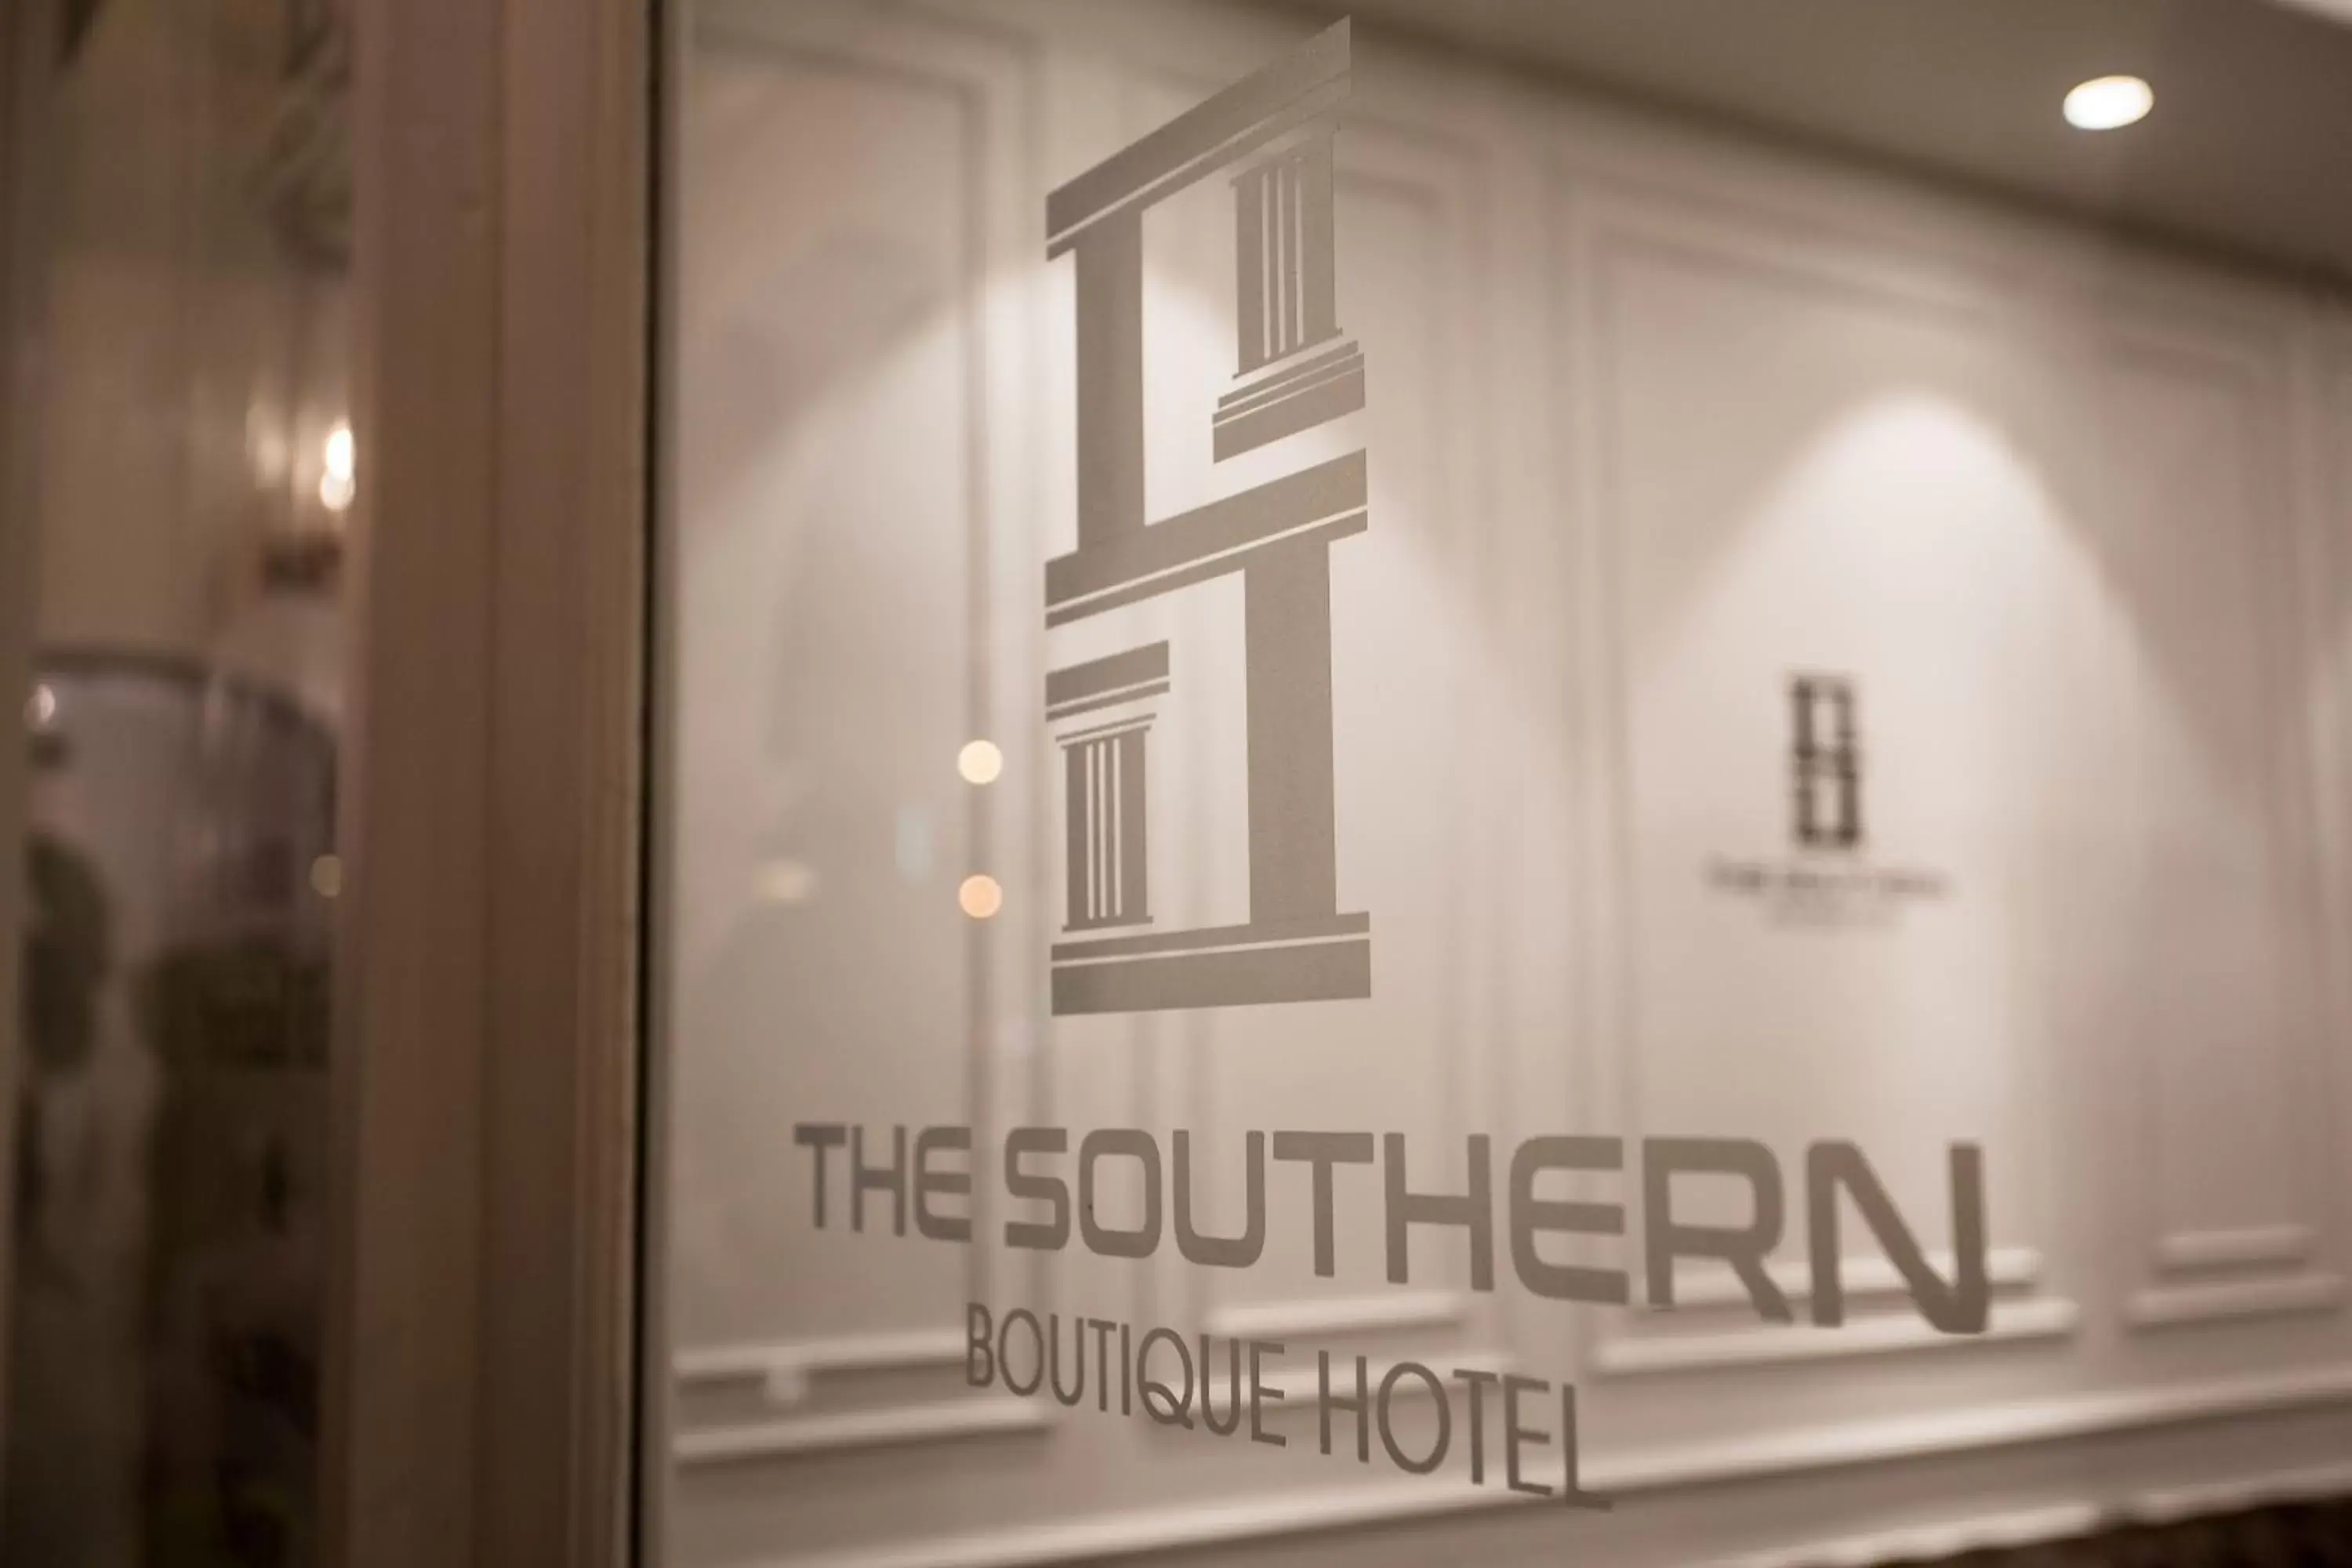 Property logo or sign, Property Logo/Sign in The Southern Boutique Hotel